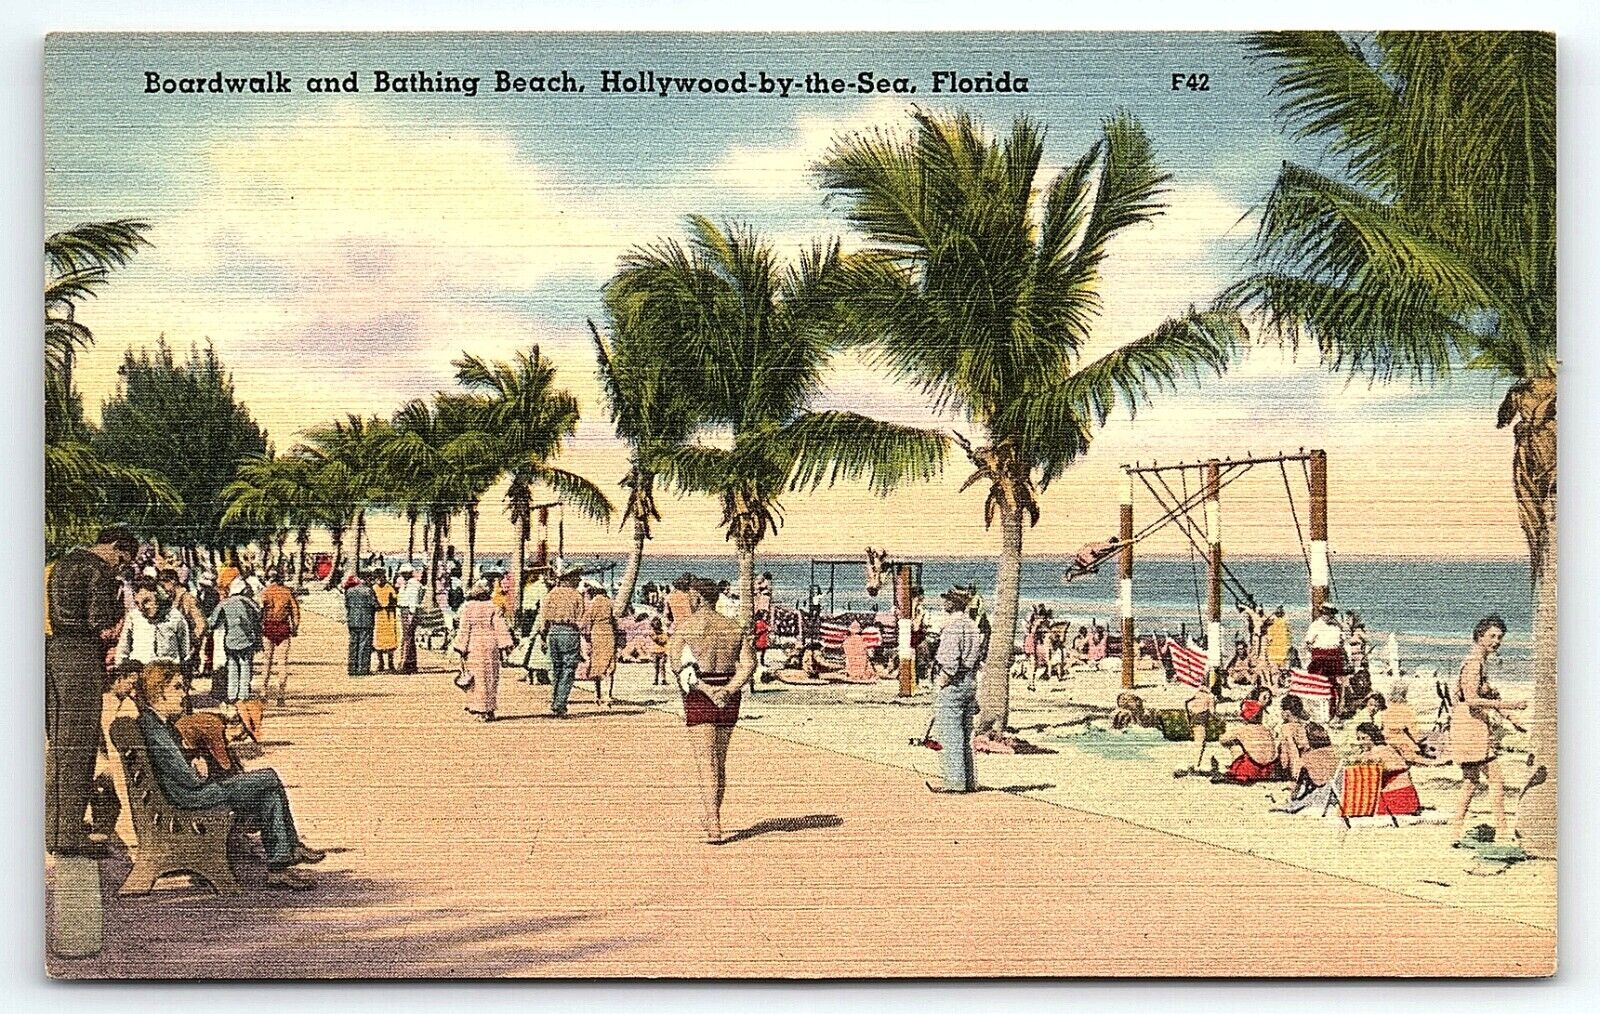 HOLLYWOOD-BY-THE-SEA FLORIDA BOARDWALK AND BATHING BEACH LINEN POSTCARD P5339